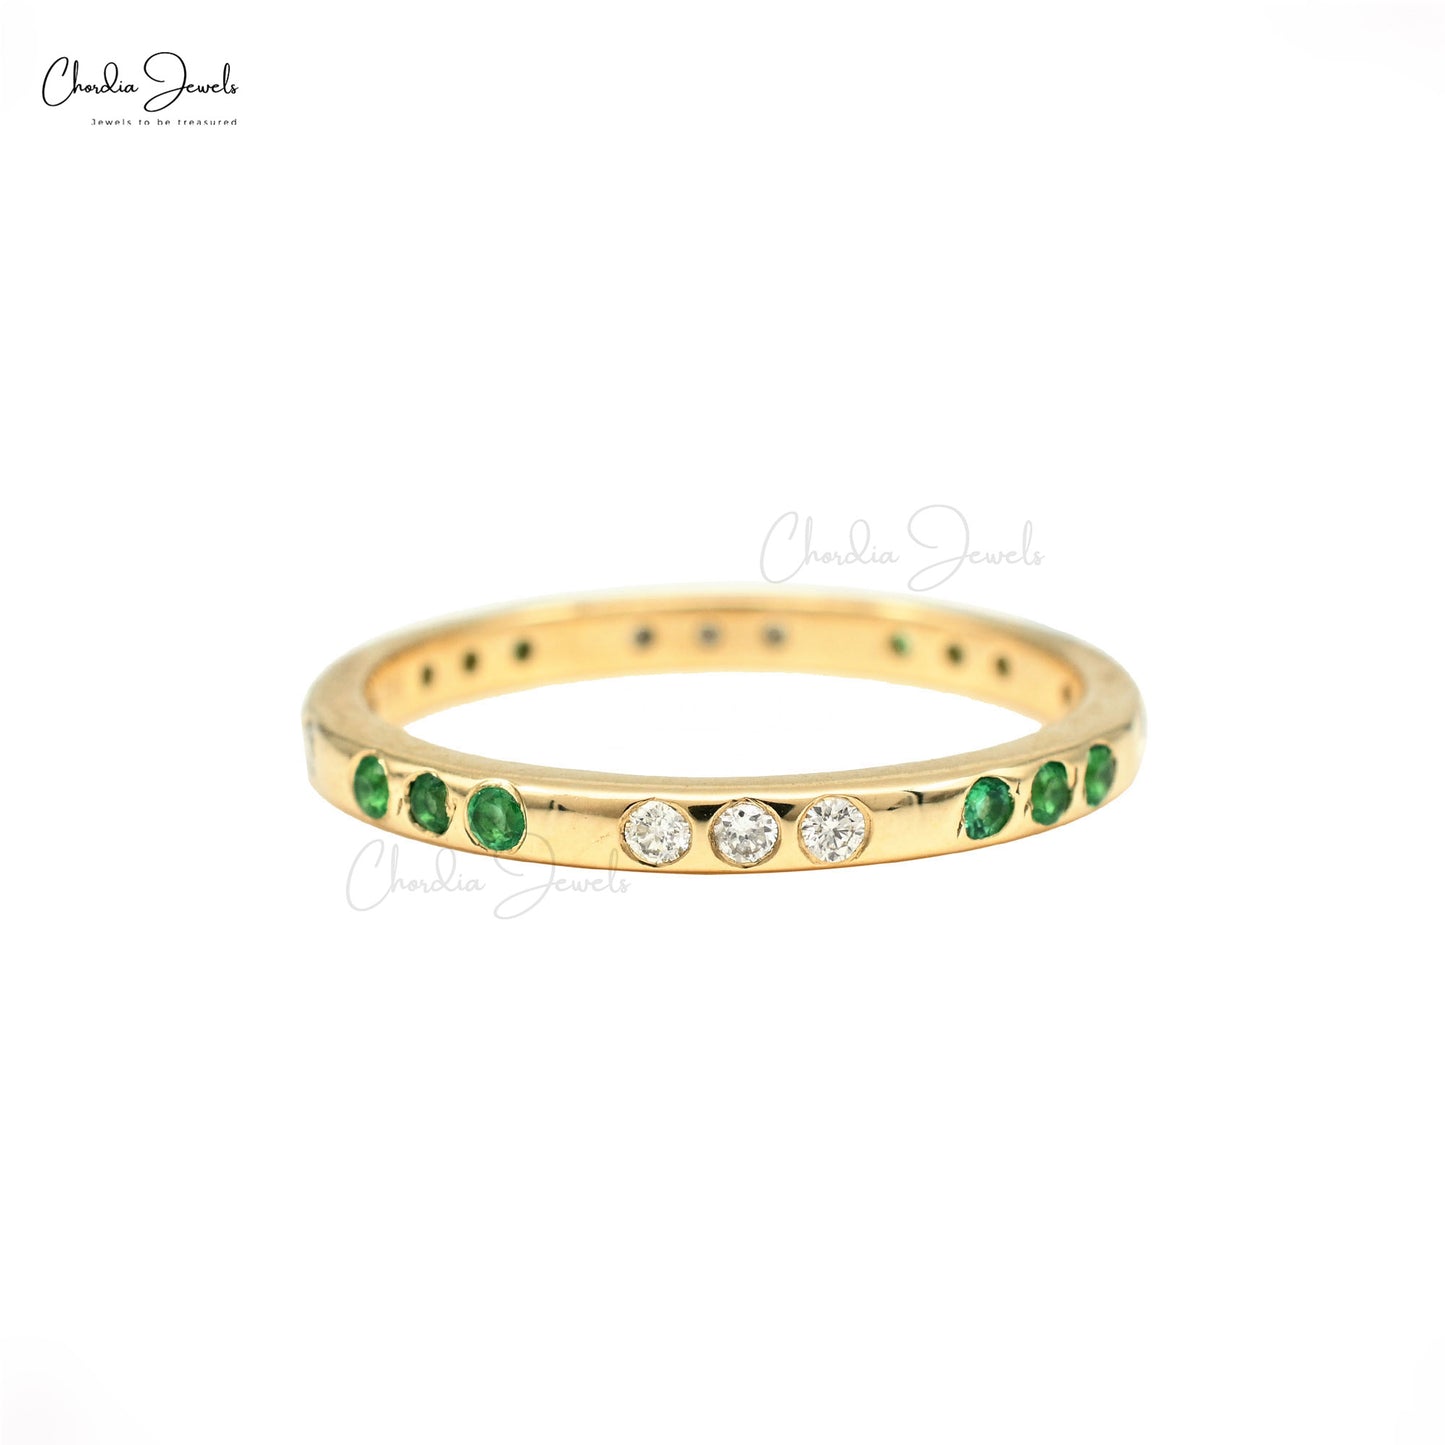 Adorn yourself with our women's emerald ring.